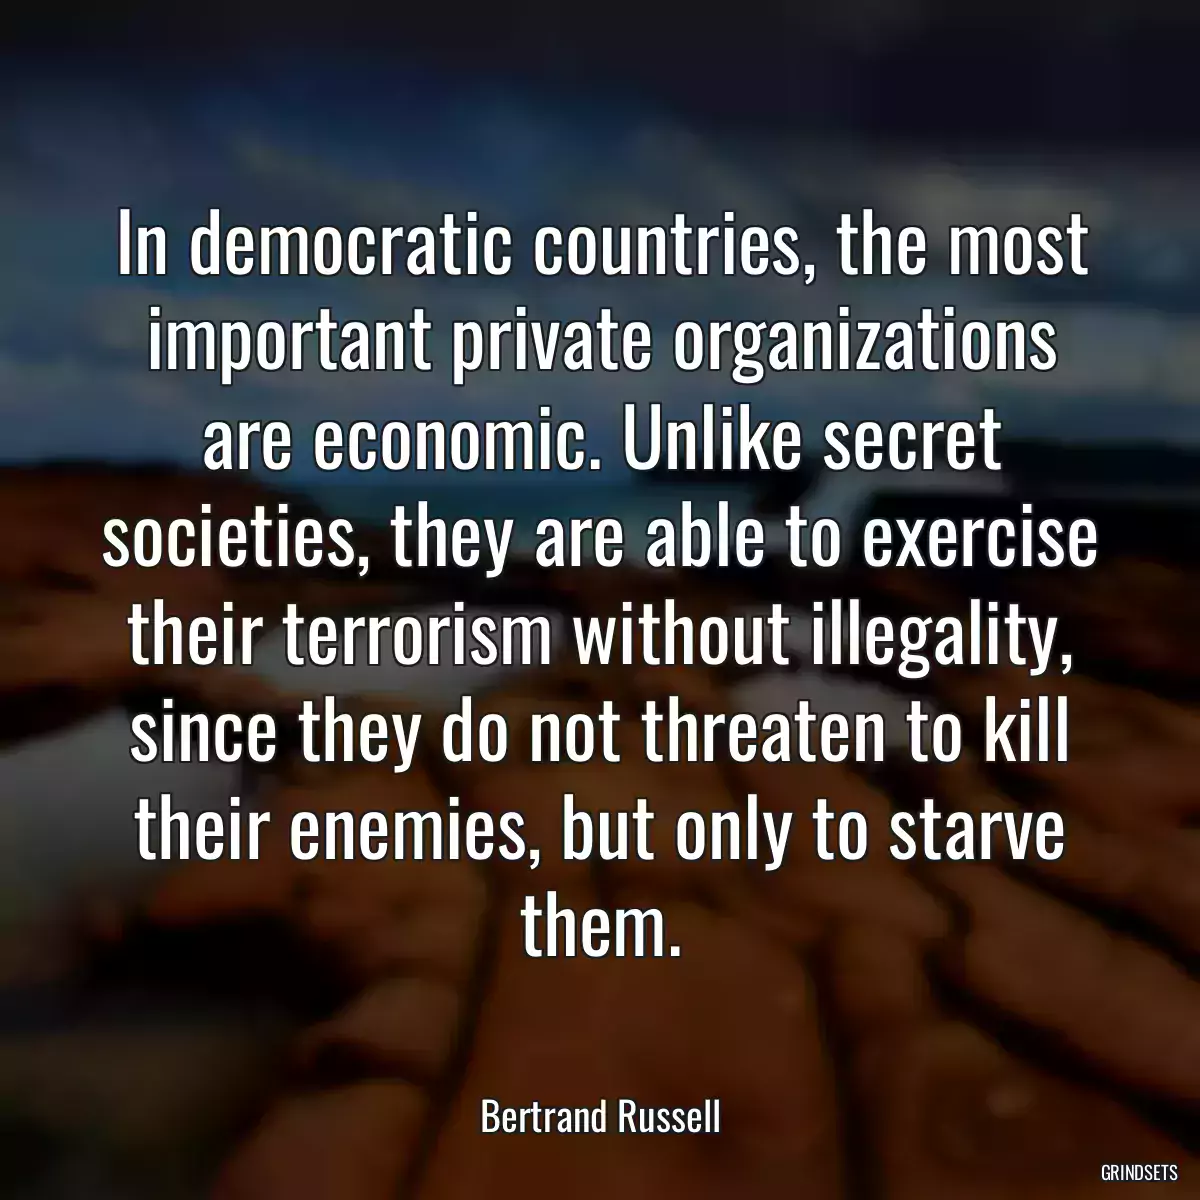 In democratic countries, the most important private organizations are economic. Unlike secret societies, they are able to exercise their terrorism without illegality, since they do not threaten to kill their enemies, but only to starve them.